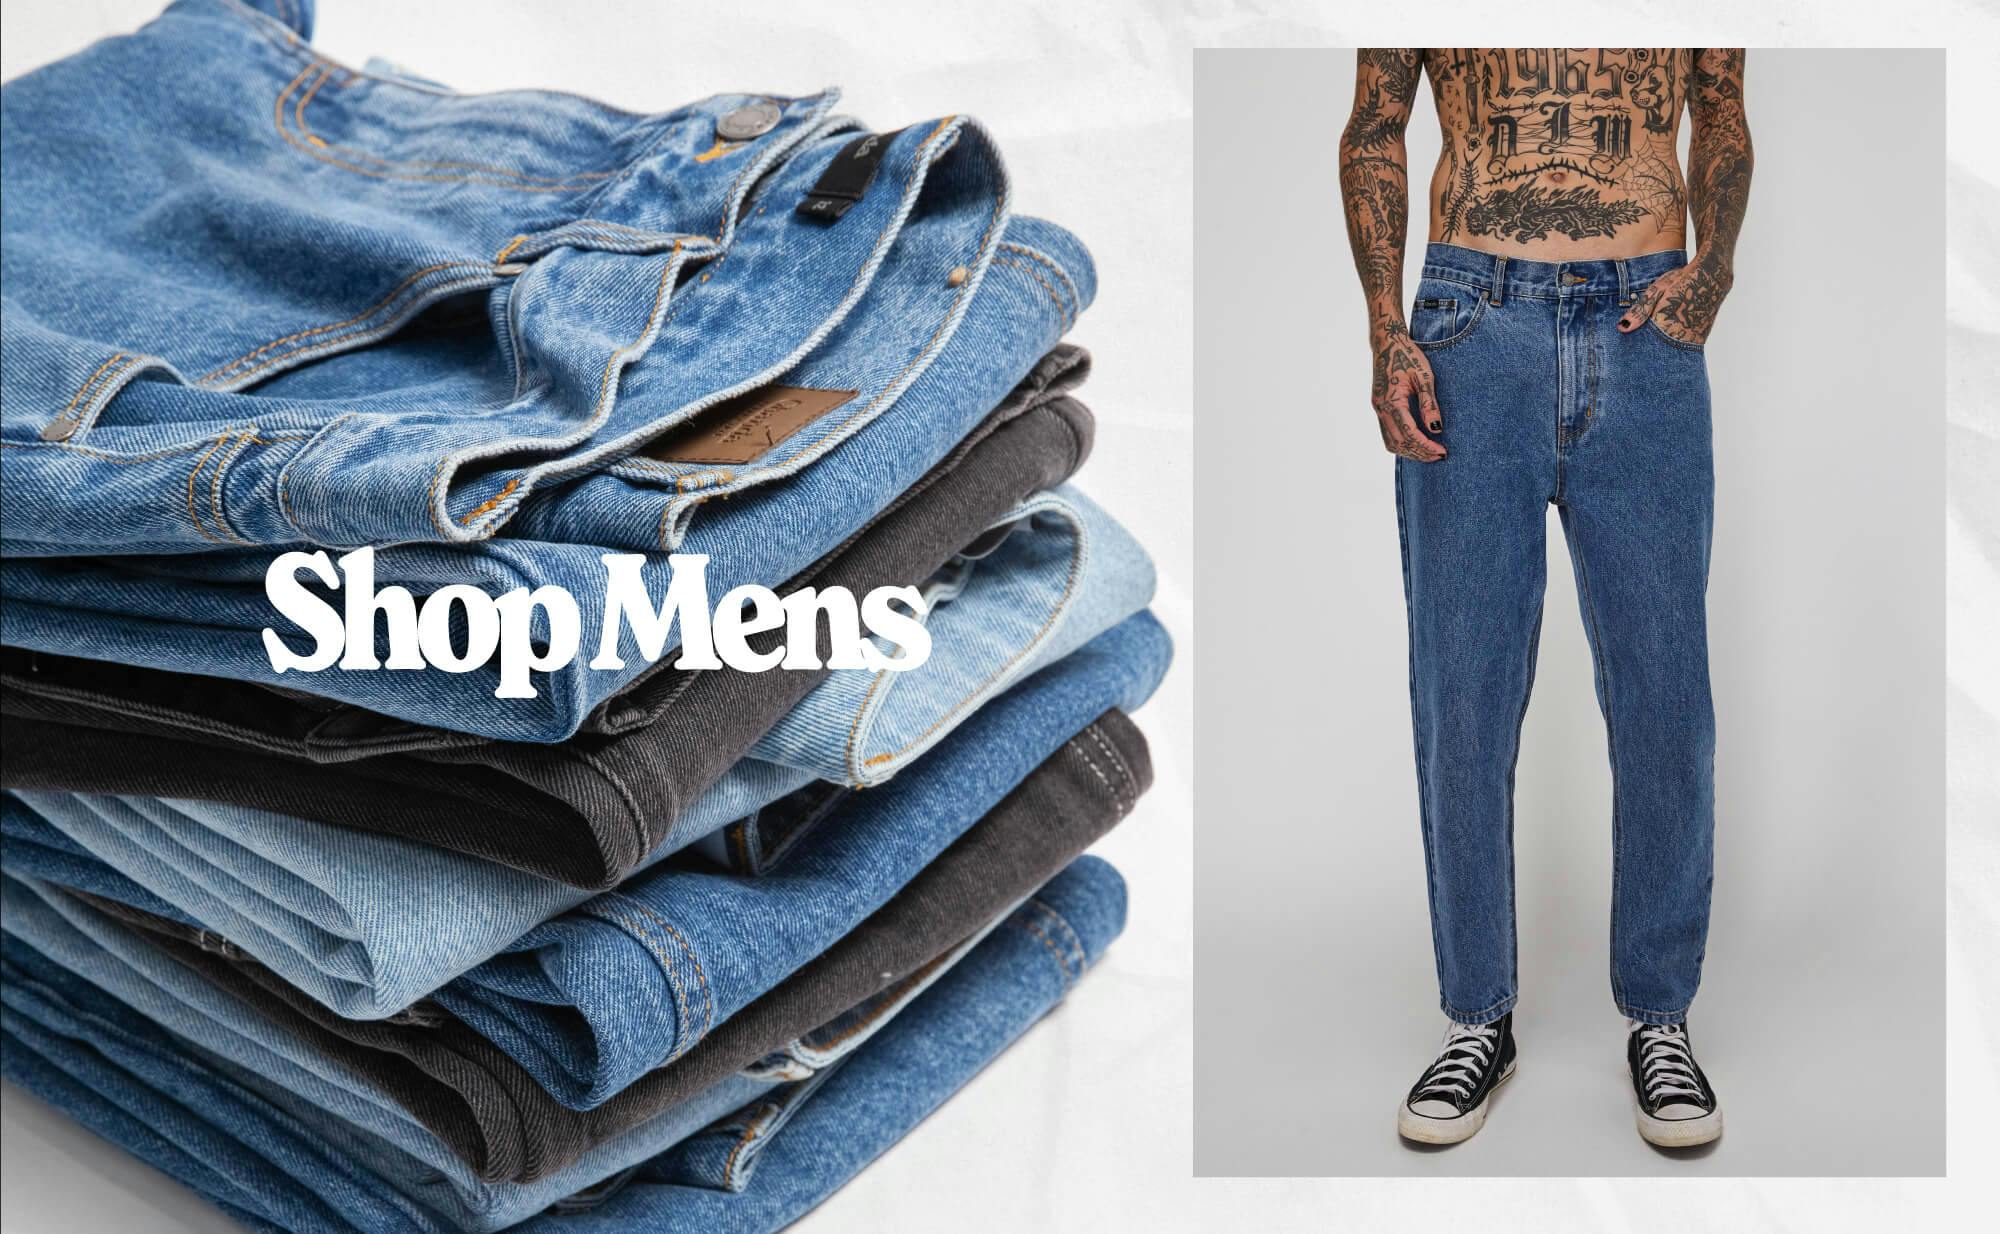 Banner of images. Text reads "Shop Mens". Image on the left is a stack of denim jeans, image on the right is an image of the Dogtown Jeans on a male model. 